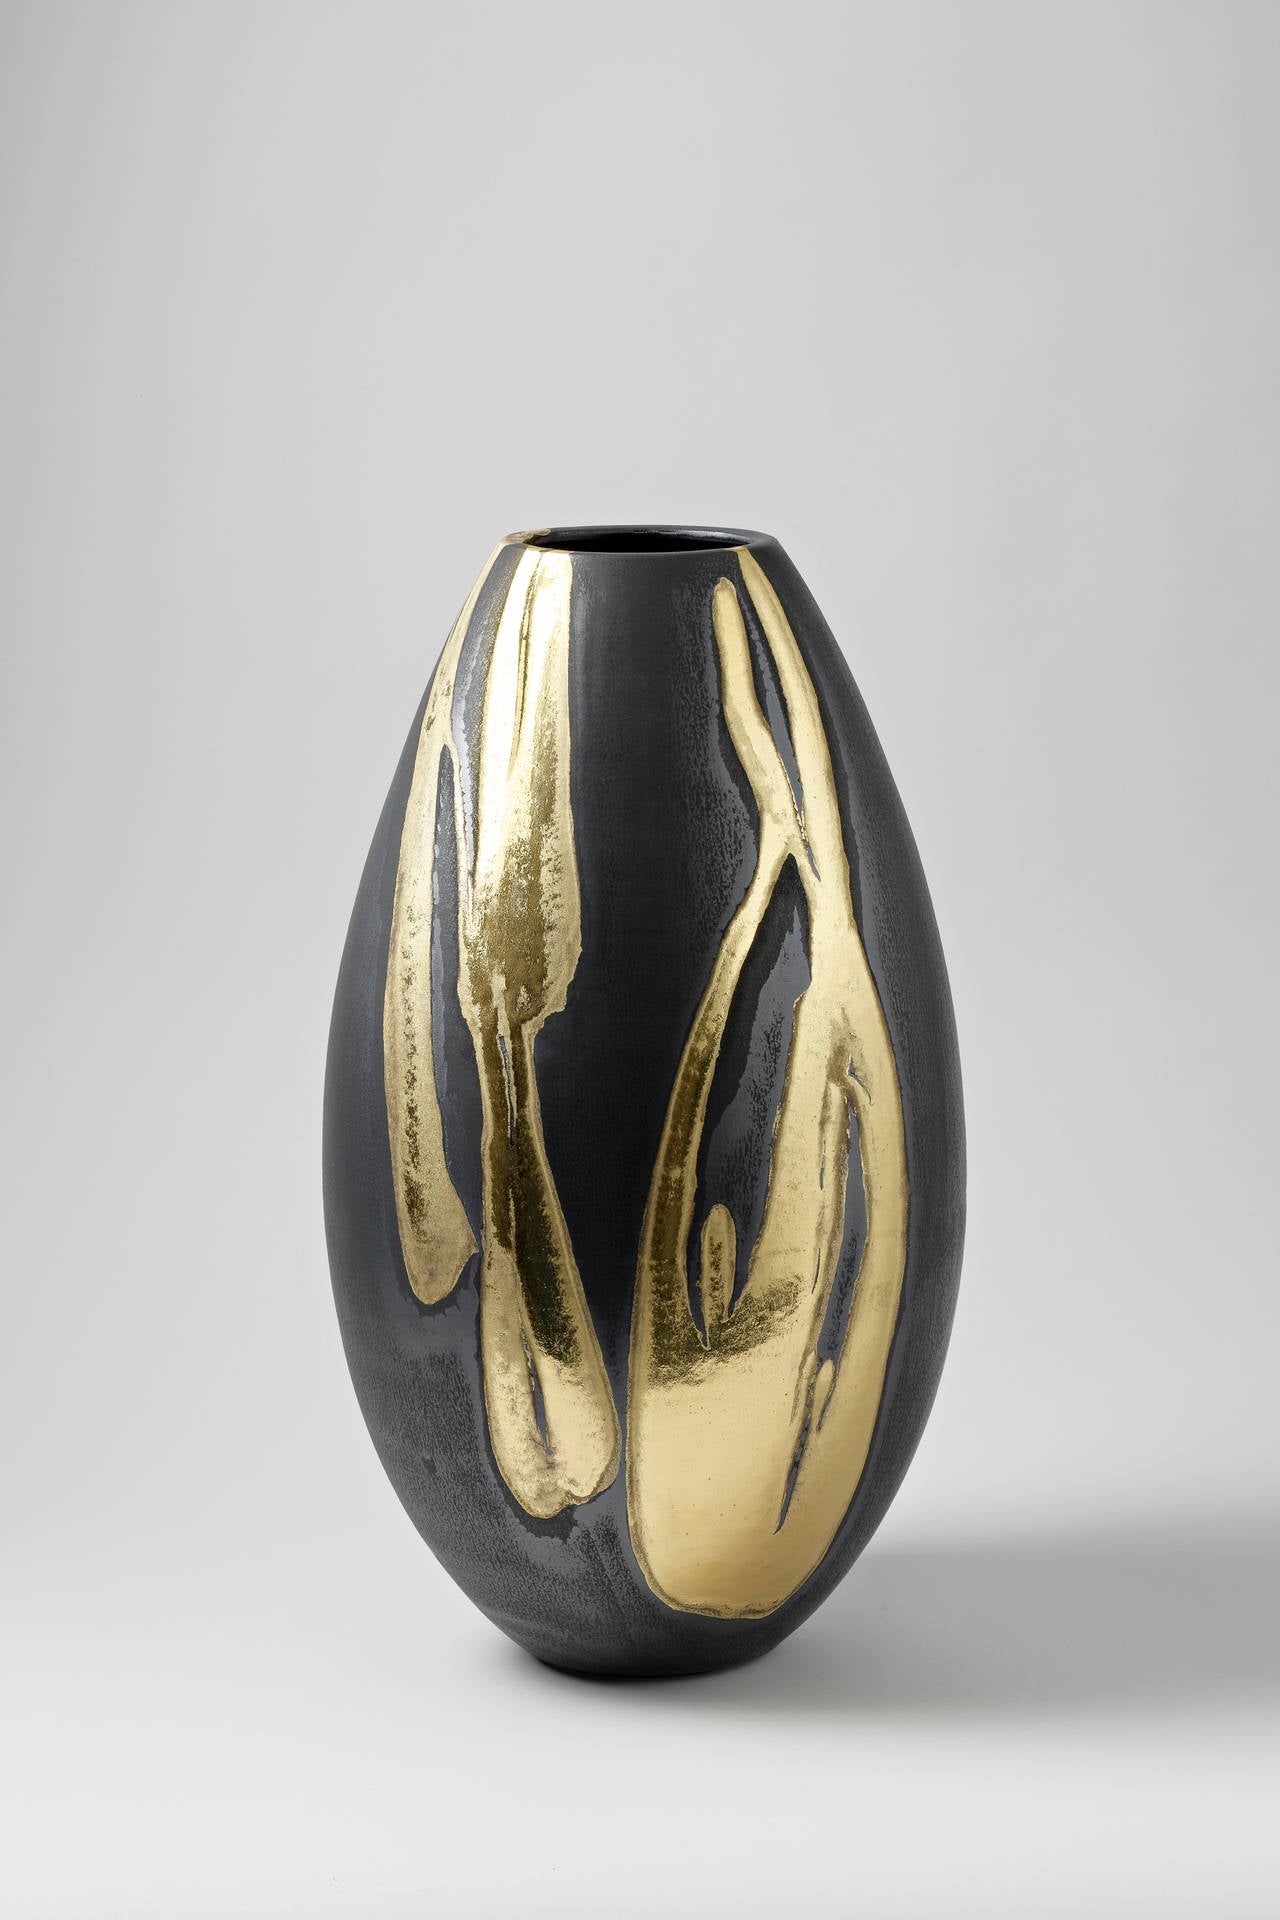 An important stoneware vase with black and gold glazes decoration.
Handwritten signature under the base.
2014.